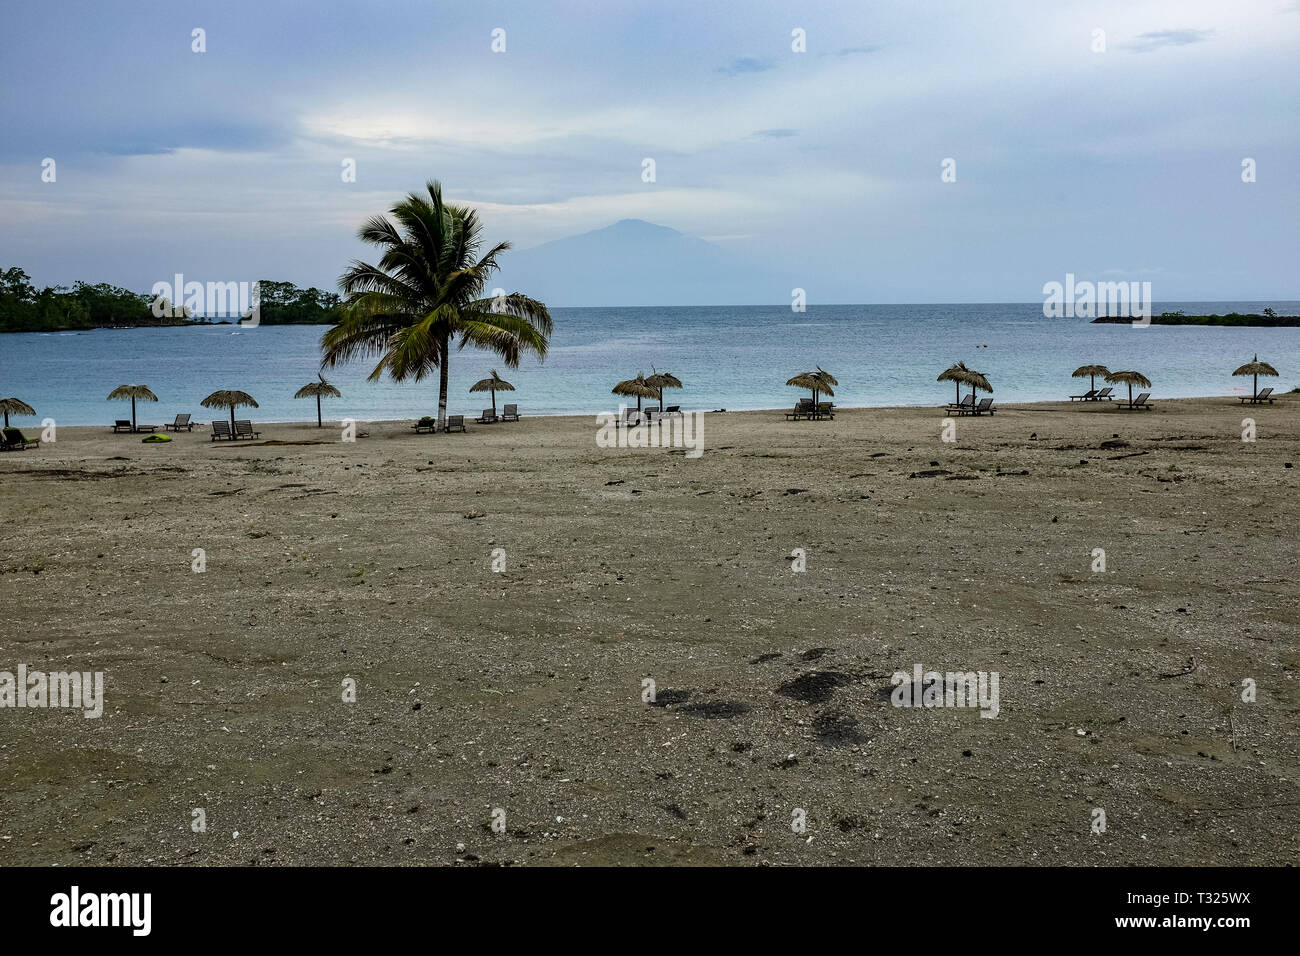 A view of Mount Cameroon from across the sea from Bioko Island, Equatorial Guinea, with a beach, palm trees and sun loungers in the foreground Stock Photo